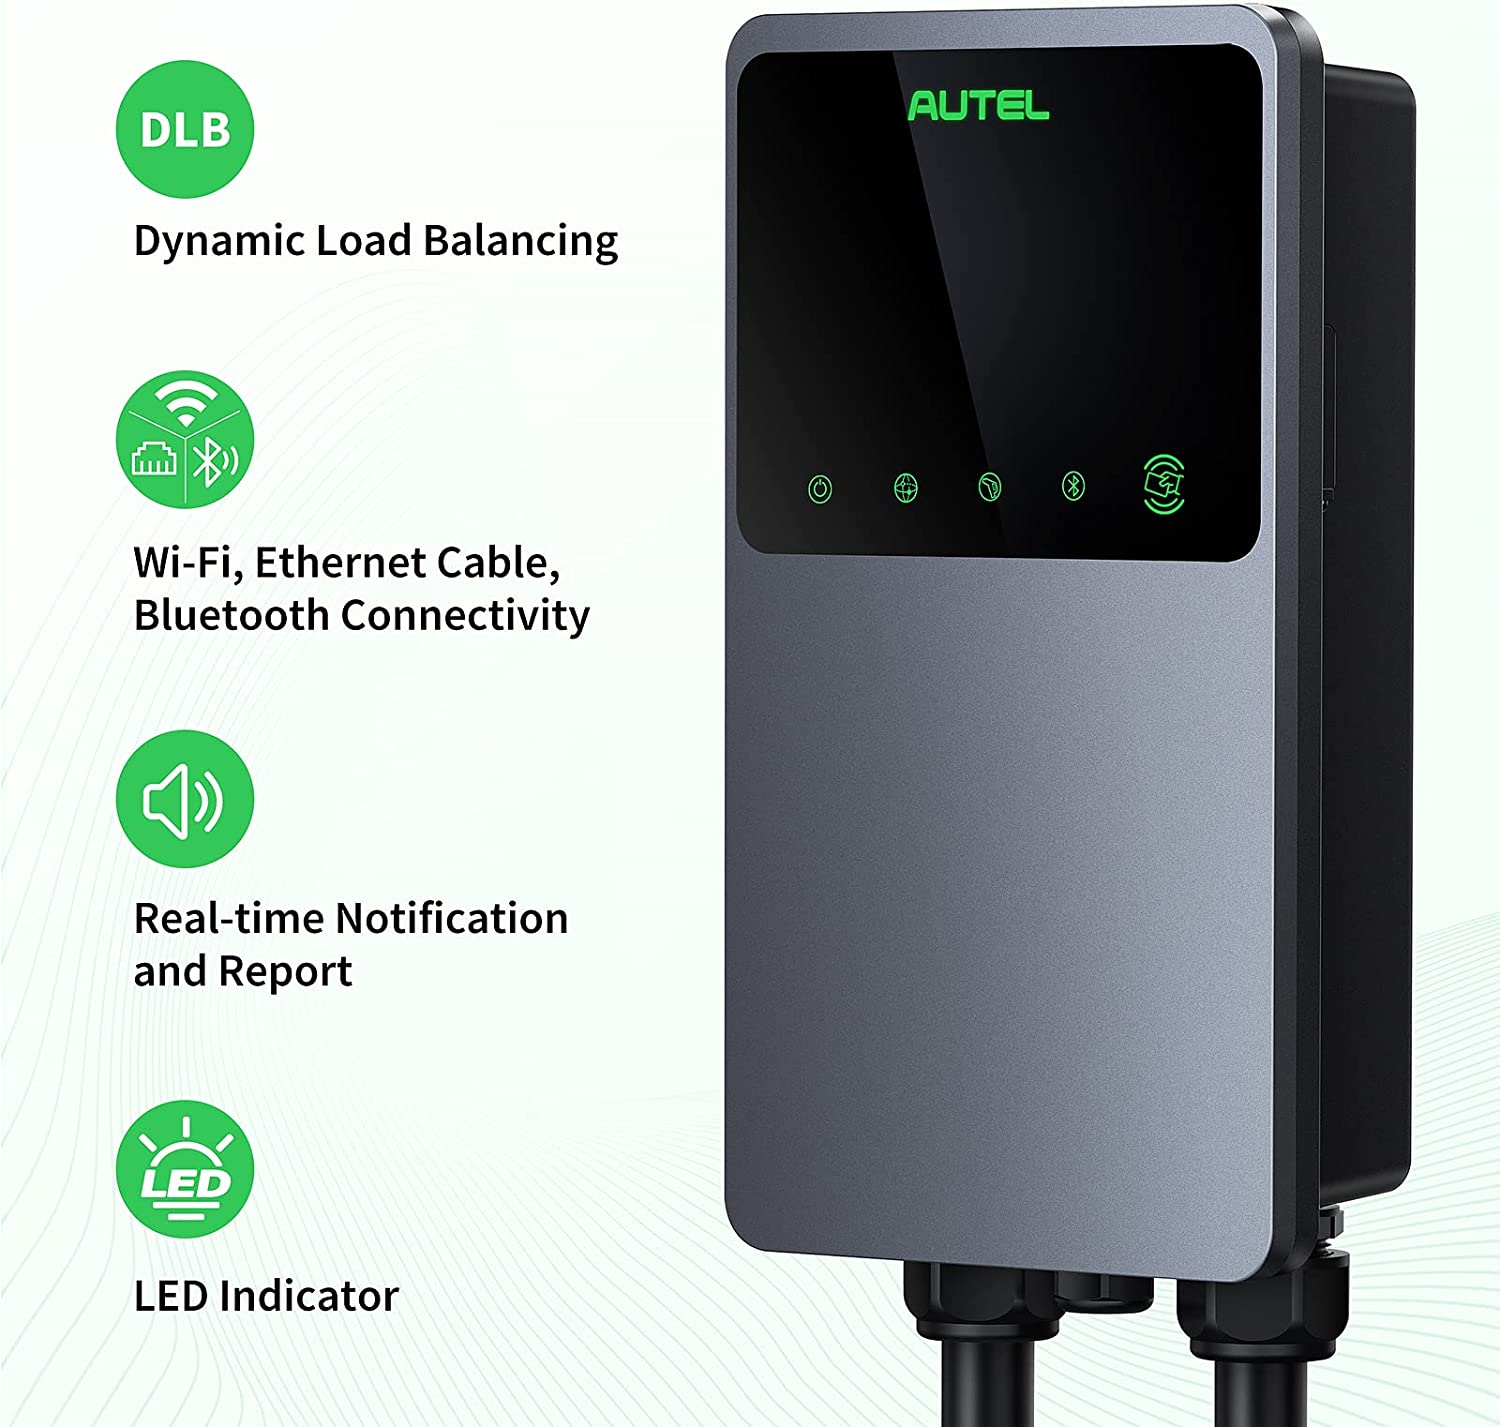 [US Ship] Autel MaxiCharger AC Wallbox Home 40A - NEMA 14-50- EV Charger with Separate Holster